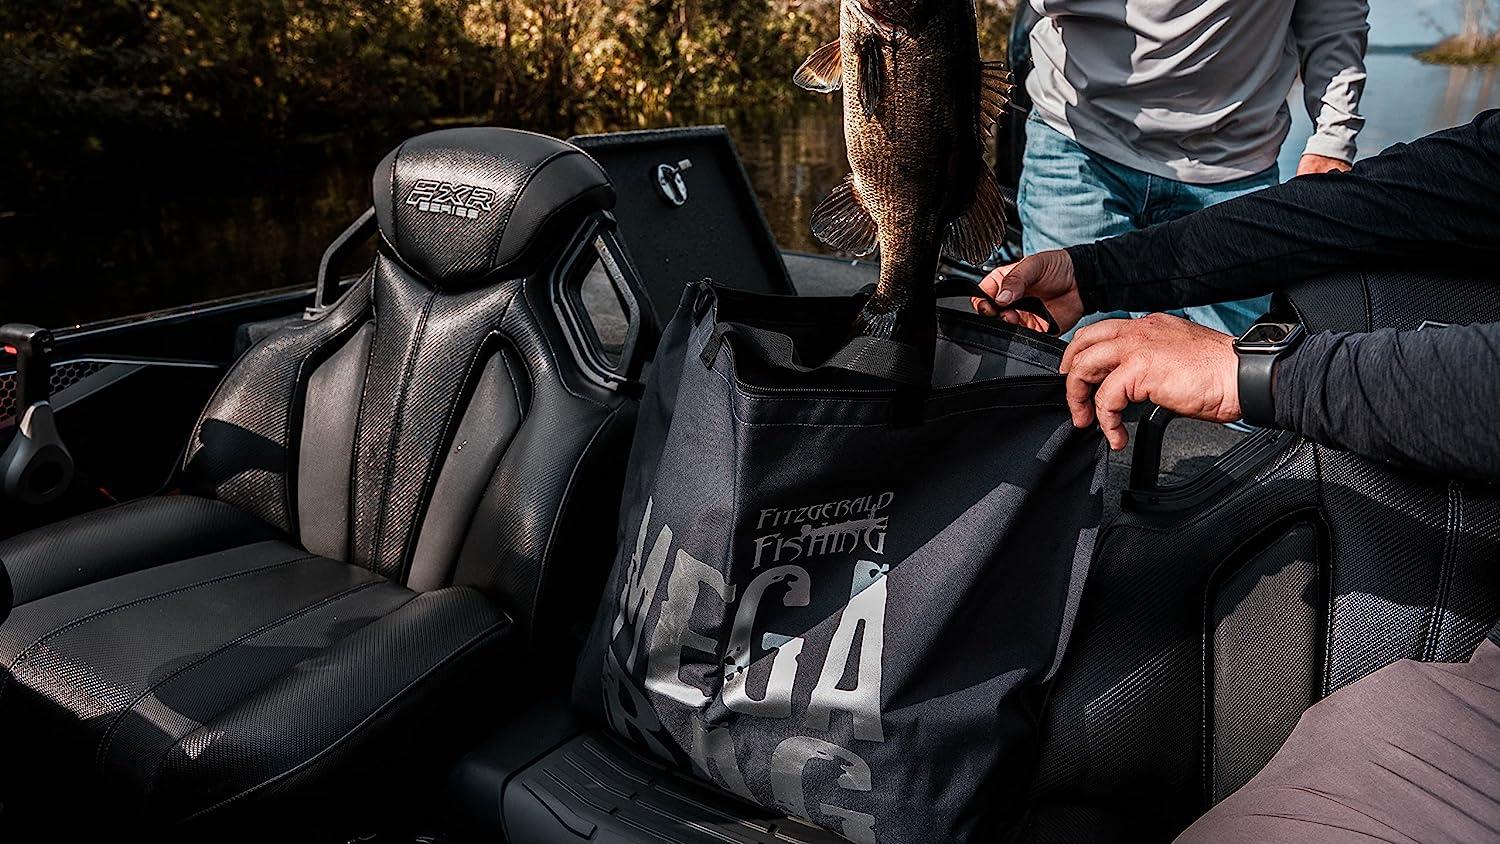 Fitzgerald Fishing Tournament Weigh in Fish Bag - Heavy Duty Fish Bags That  Transport Fish Safely, are Leak and Rip Resistant, Include Zipper Closure -  Mega Bag Logo